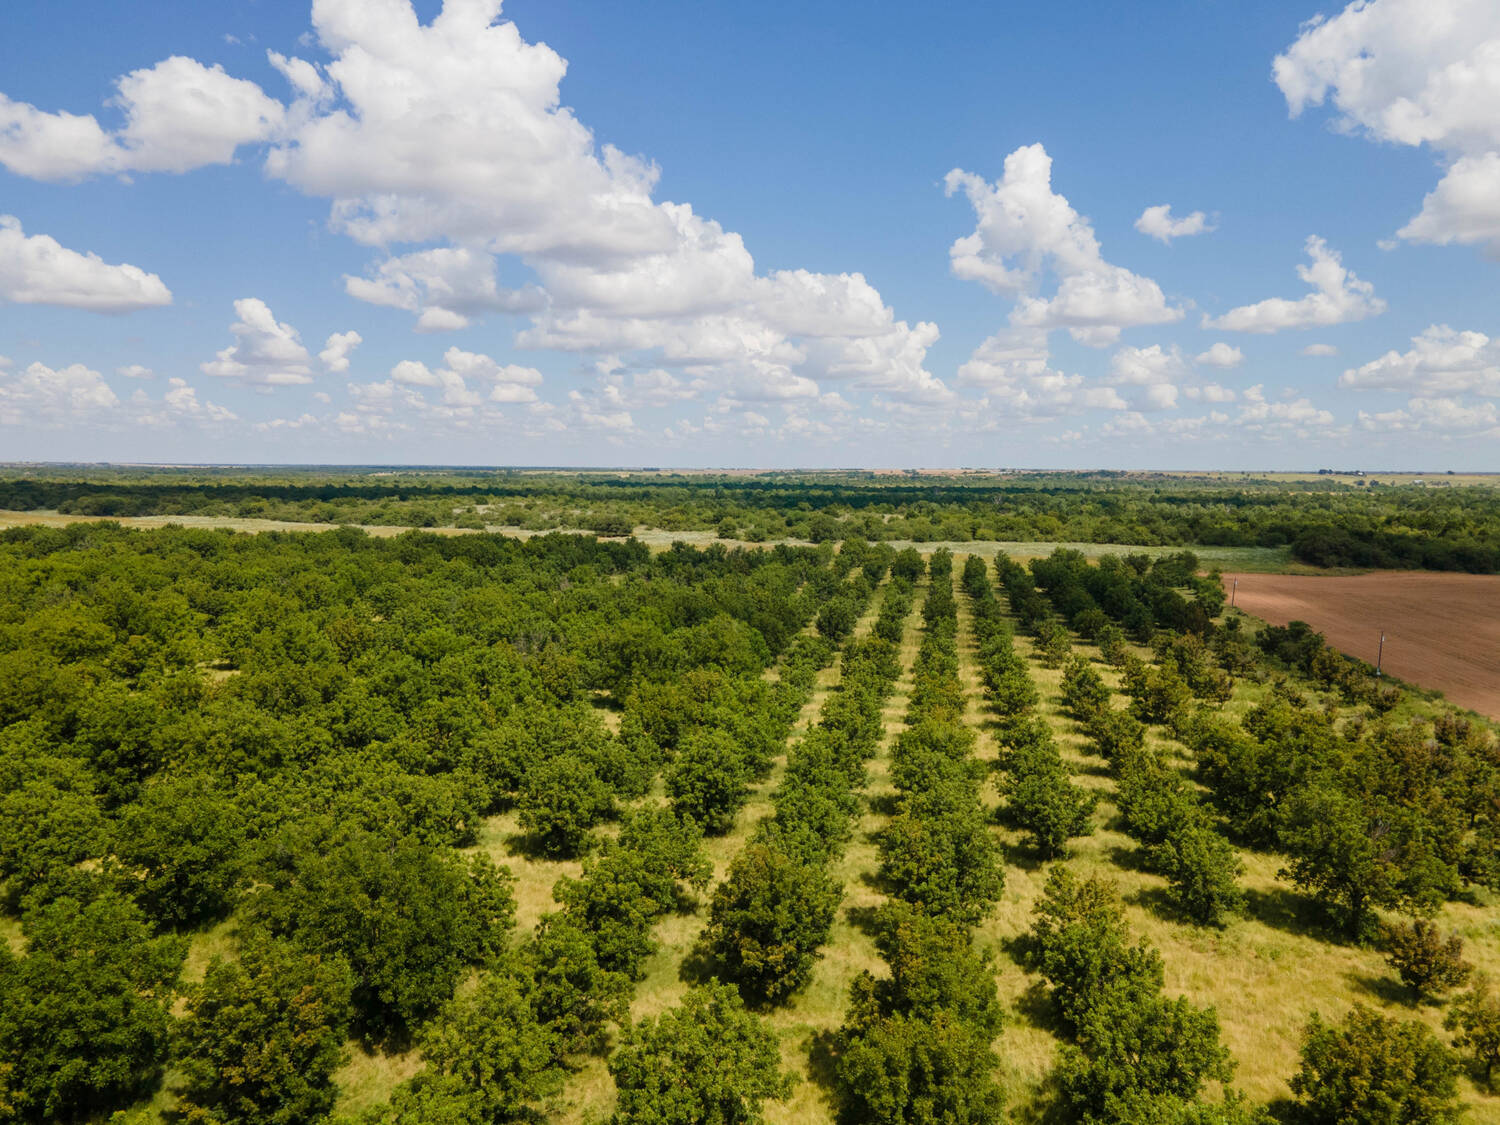 The-Pecan-Tract-Clay-County-Pecan-Orchard-Hunting-Ranch-TX-Republic-Ranches-Bryan-Pickens-10-of-15